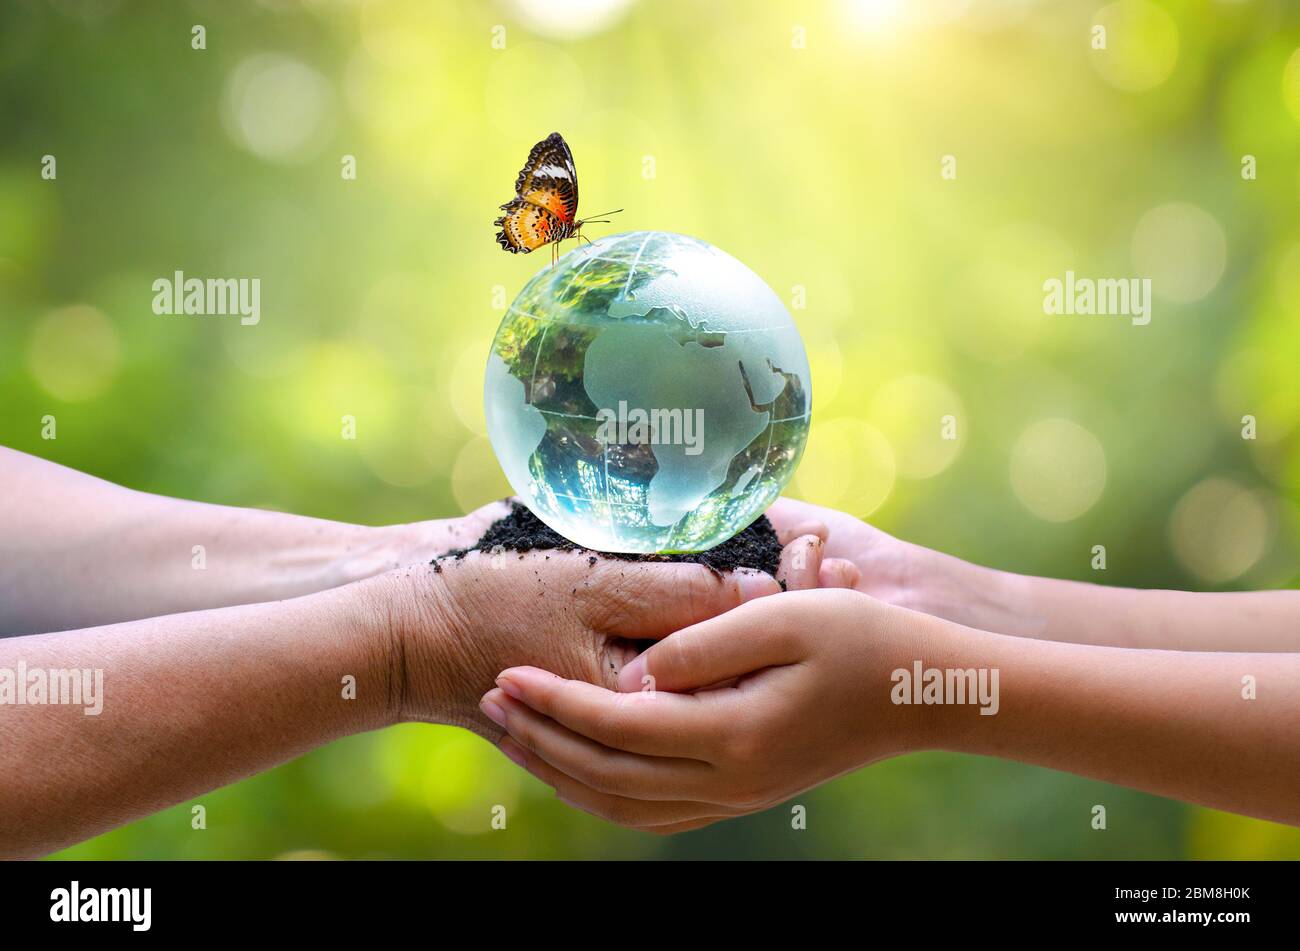 Adults are sending the world to babies. Concept day earth Save the world save environment The world is in the grass of the green bokeh background Stock Photo